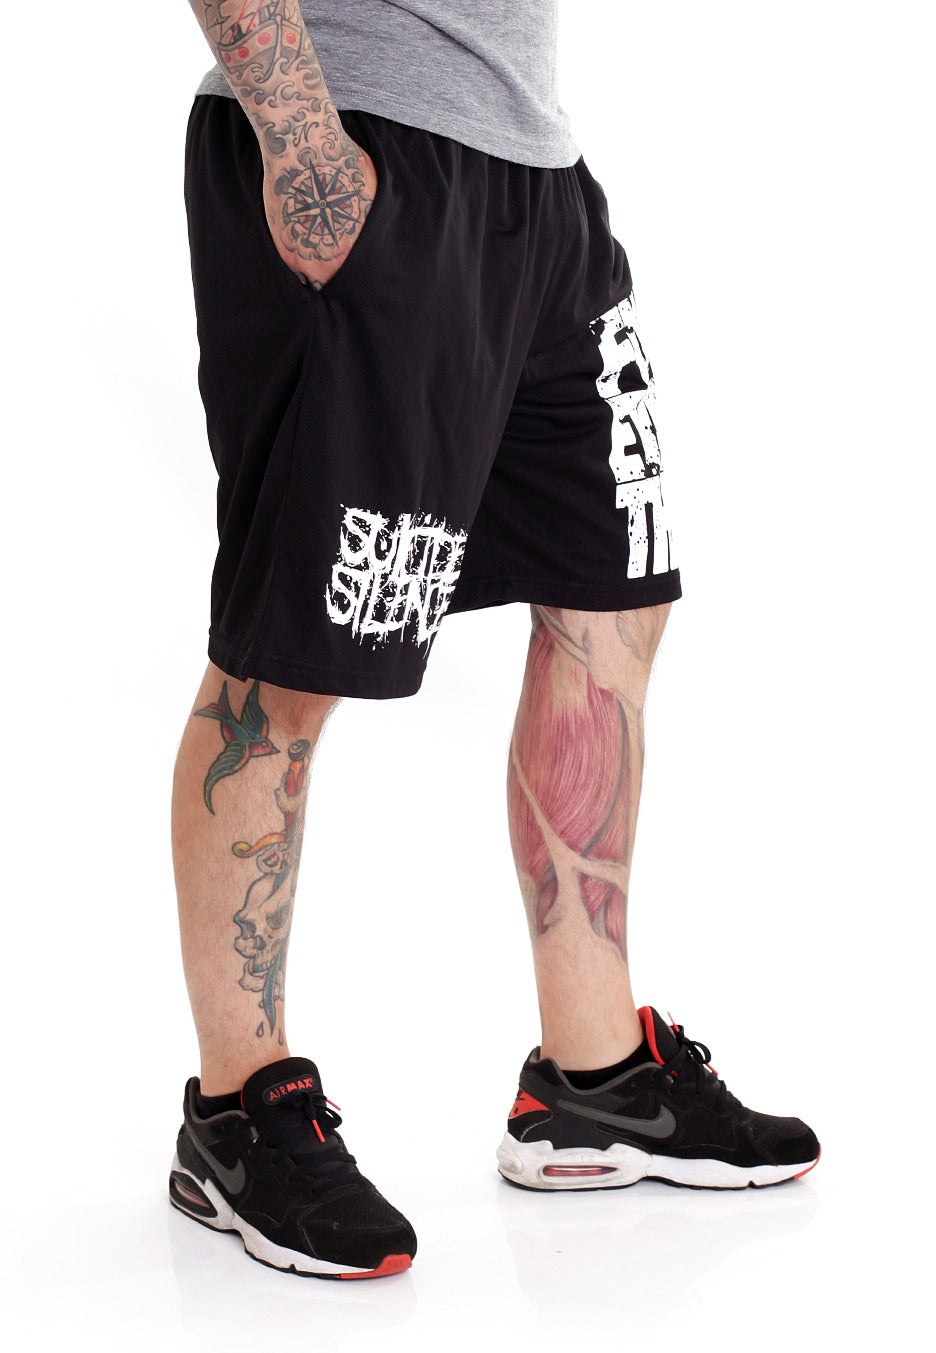 Suicide Silence - Fuck Everything  - Shorts | Men-Image